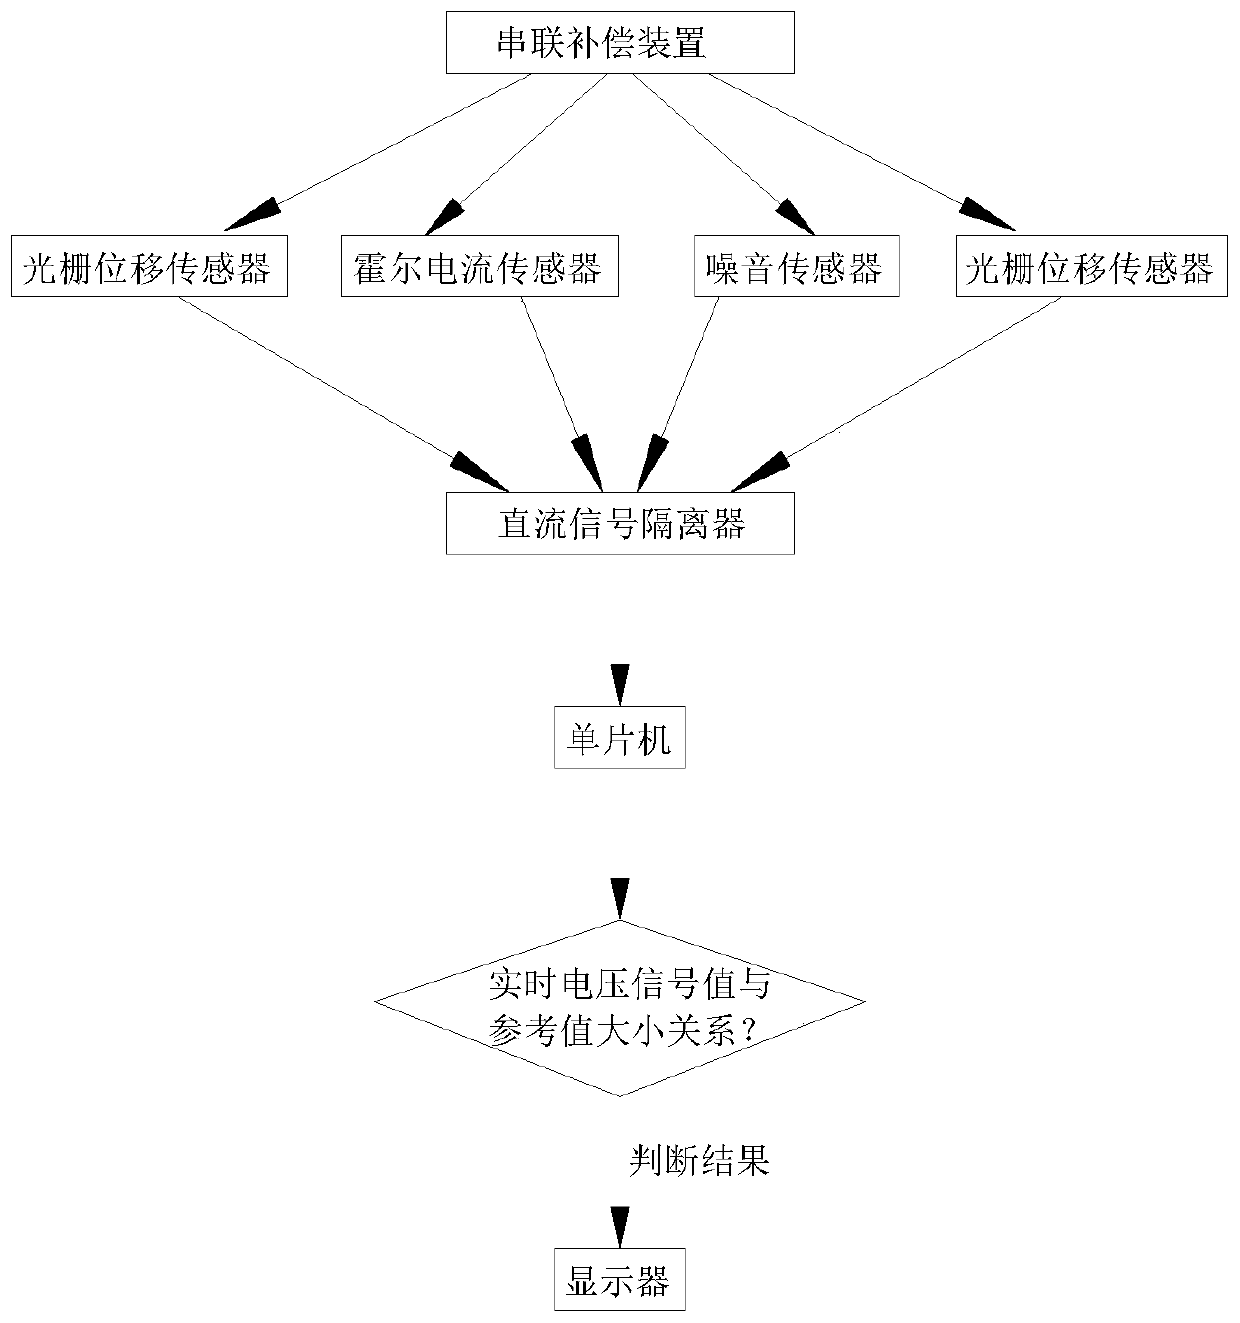 Non-contact information acquisition health discrimination system and method for series compensation device